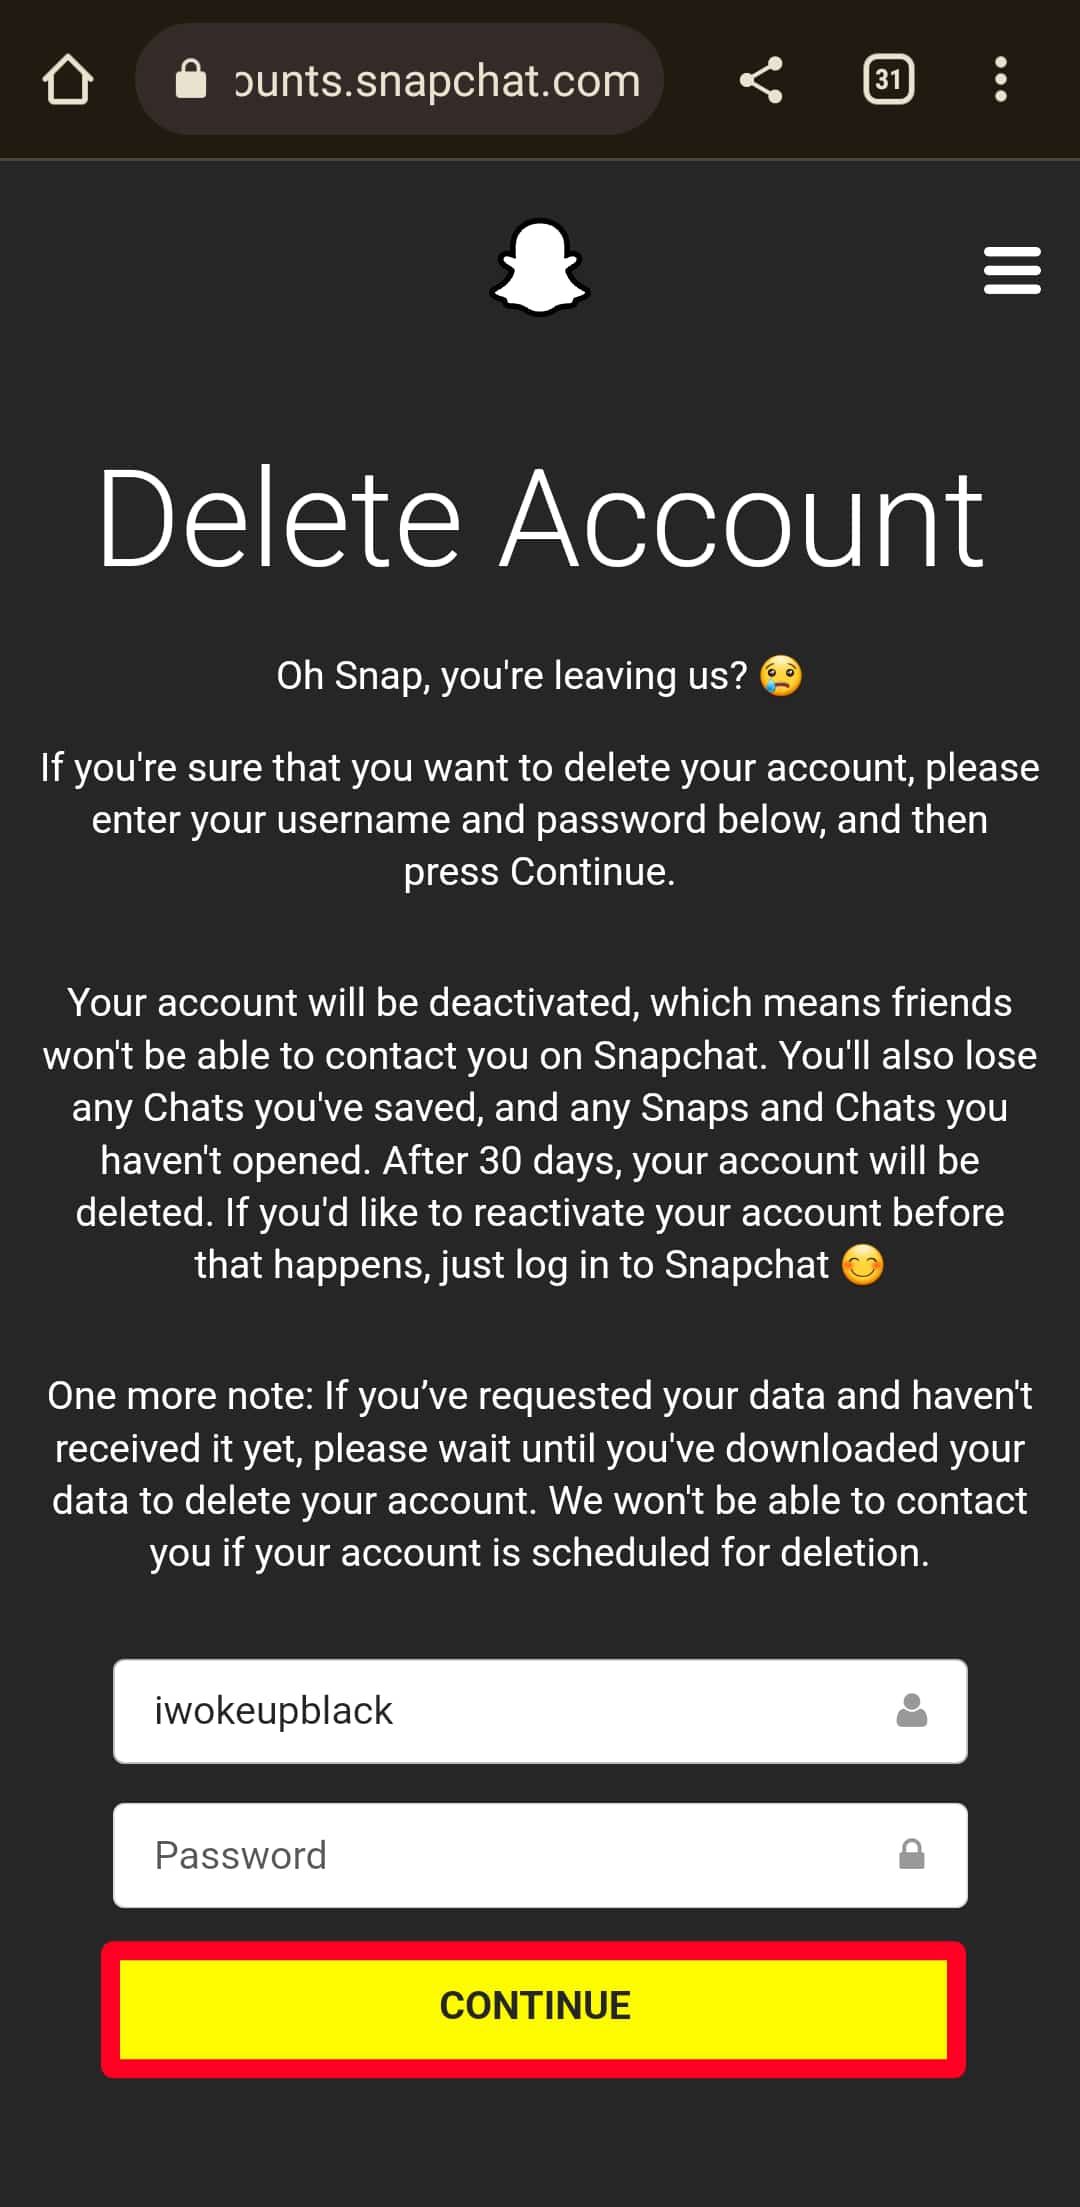 Delete Account webpage on Snapchat website